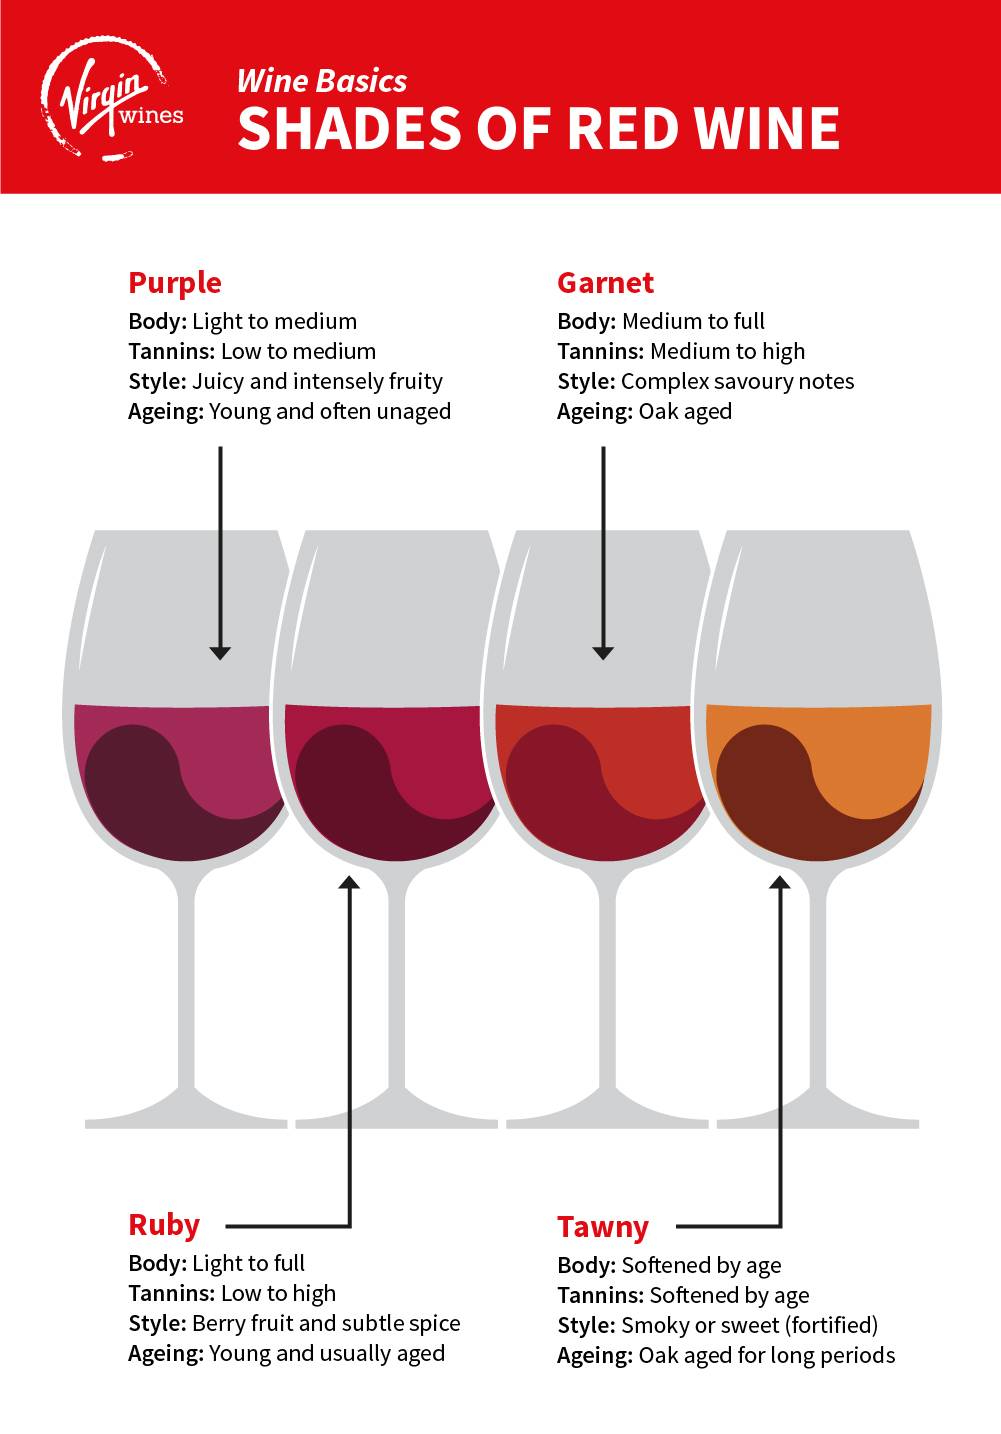 Is Cabernet Sauvignon Sweet: Deciphering Red Wine Flavors